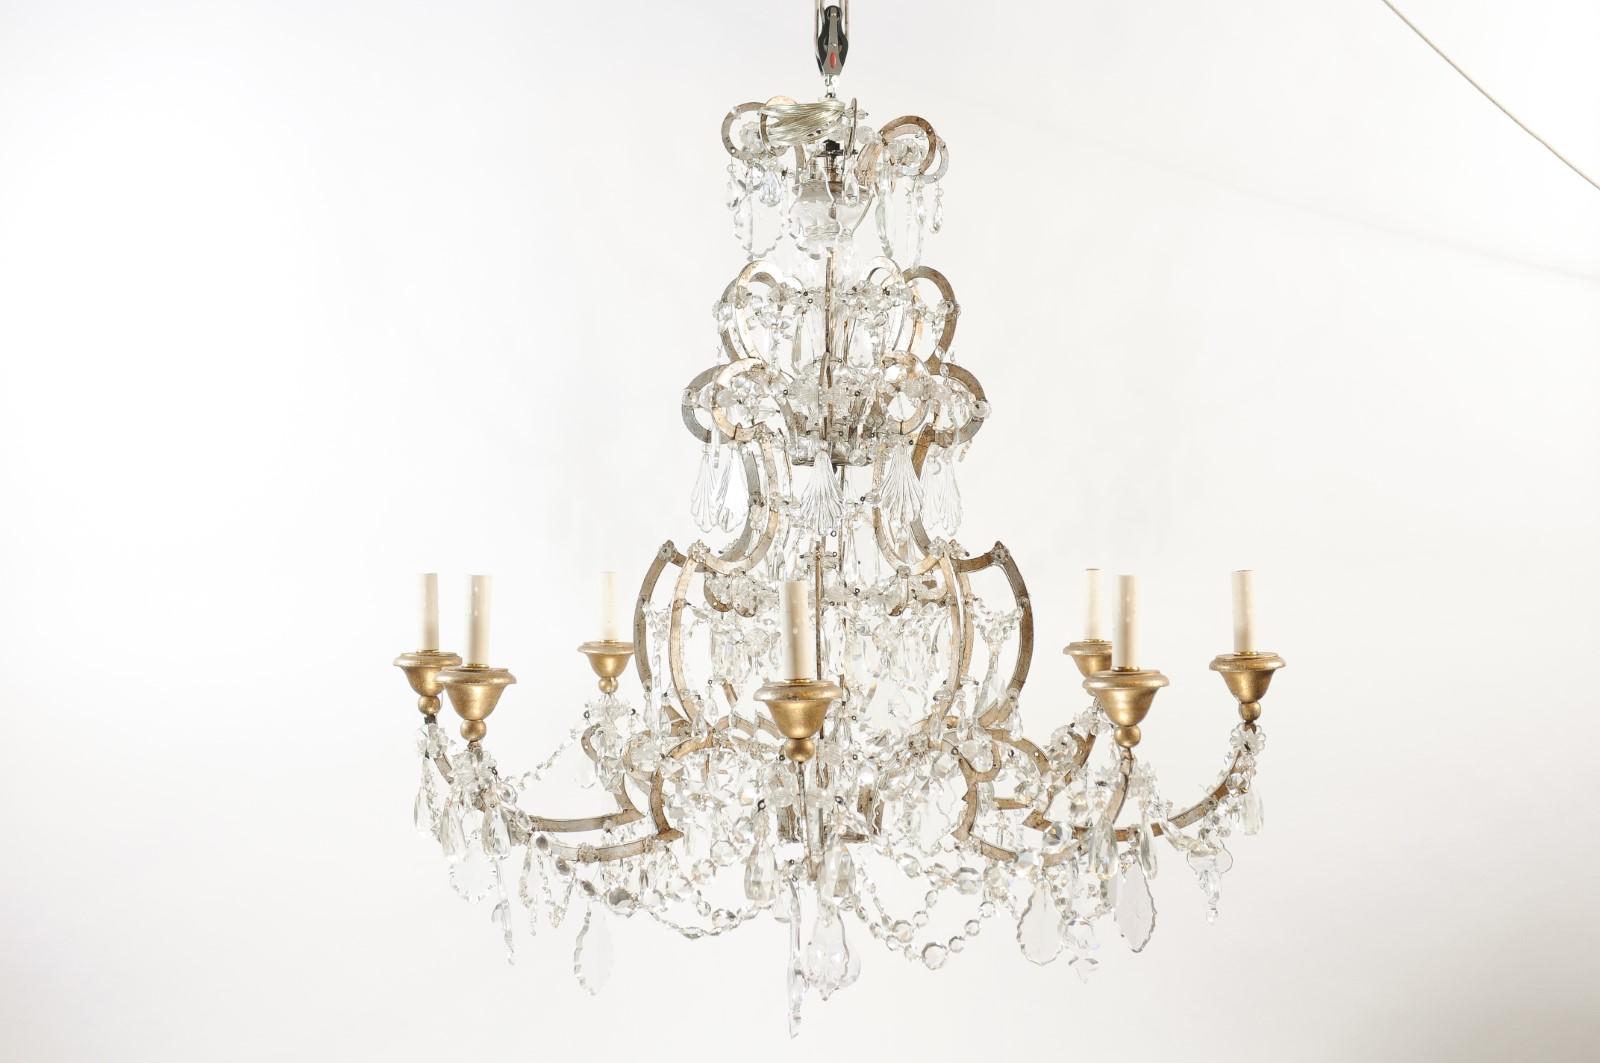 Italian Crystal & Silvered Wood Chandelier with 8 Lights, 19th Century For Sale 6